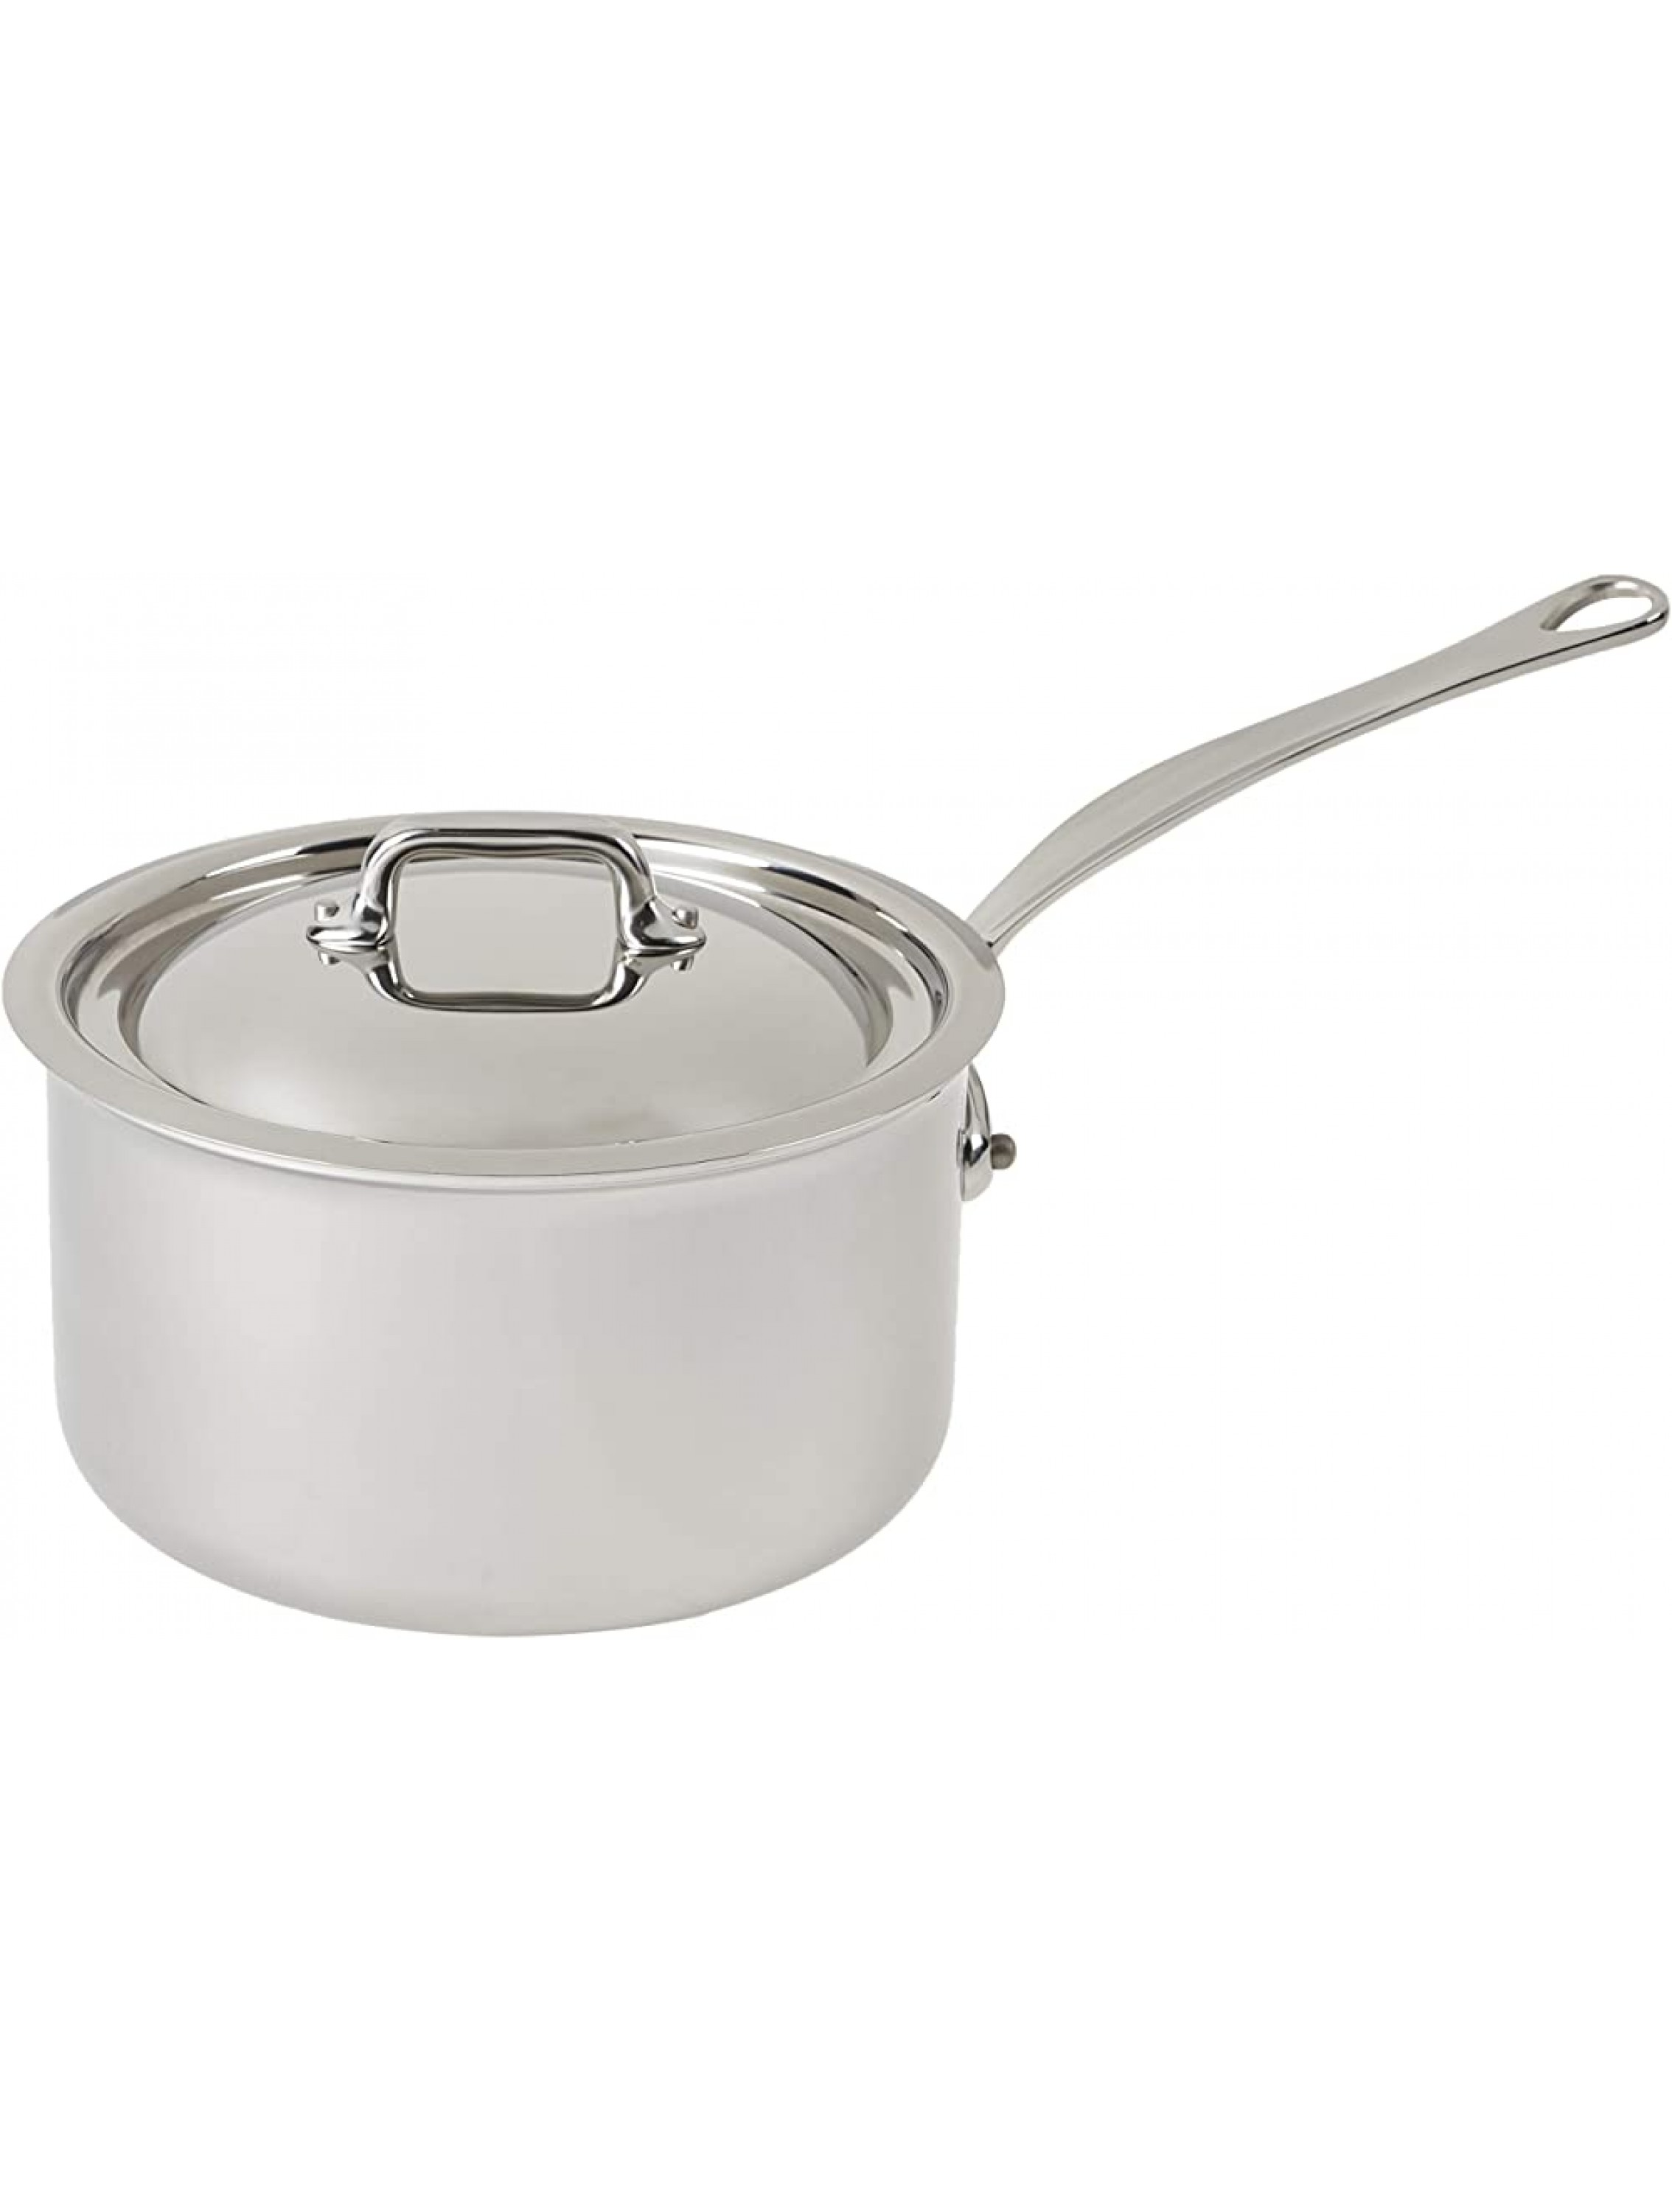 Mauviel Made In France M'Cook 5 Ply Stainless Steel 2.7 Quart Saucepan with Lid Cast Stainless Steel Handle - BDCYKQX0I